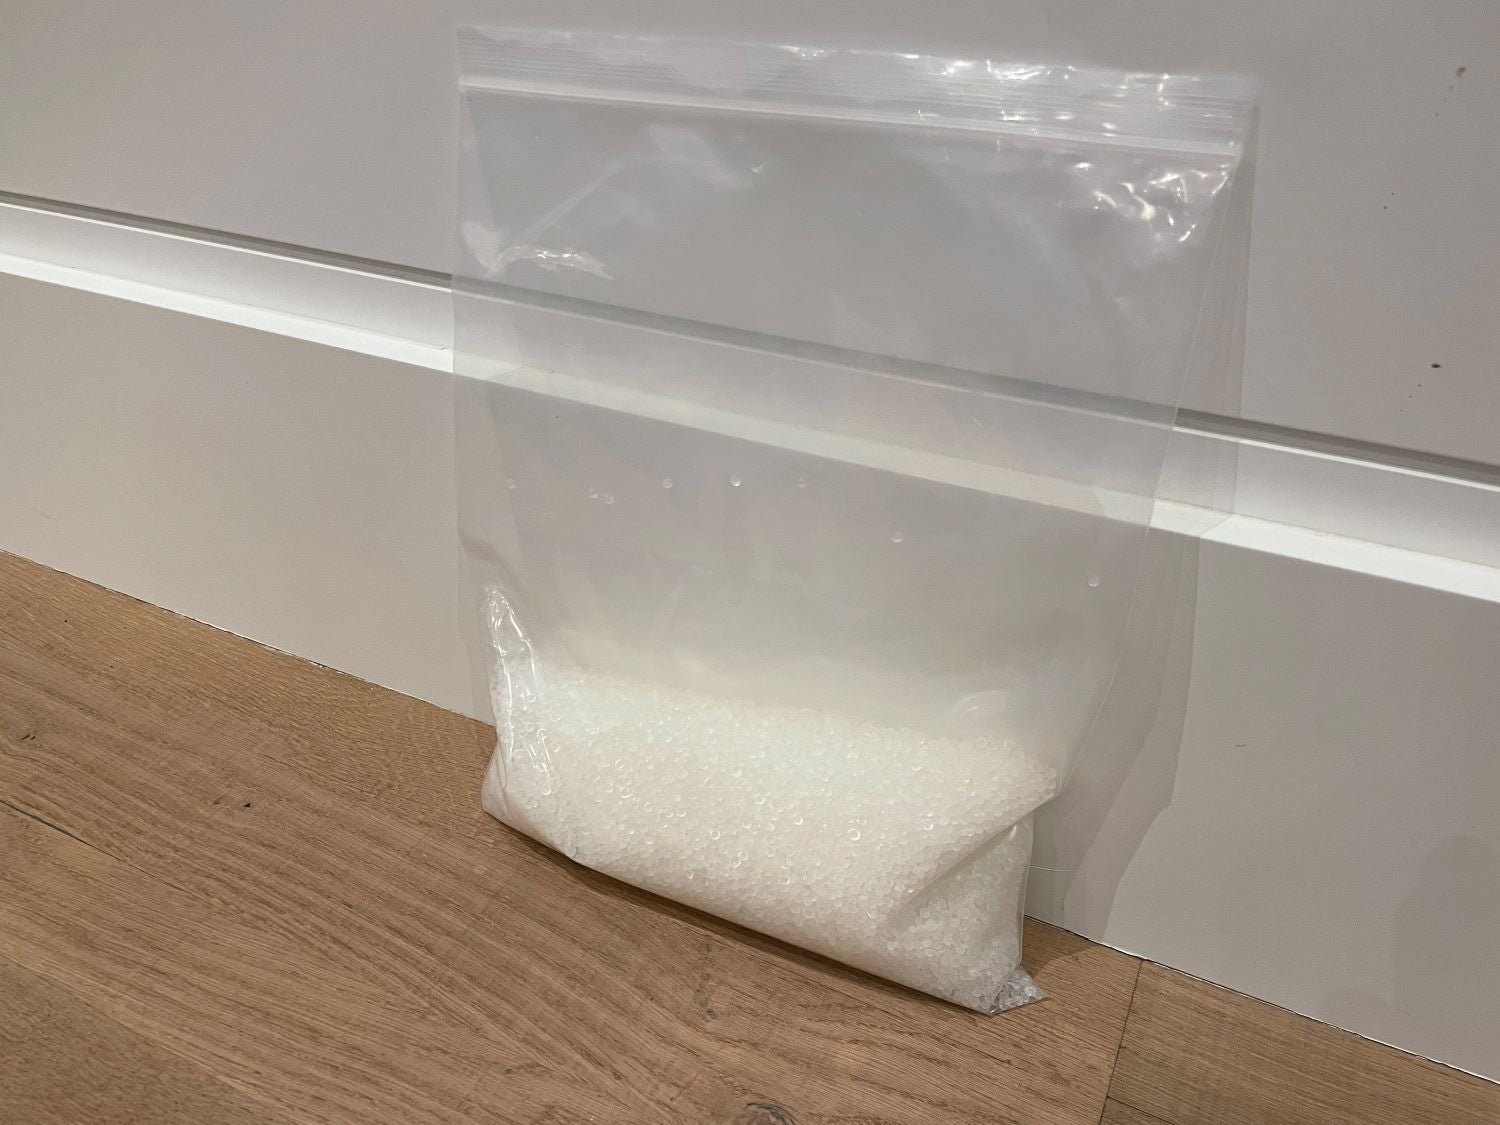 White Silica Gel Beads - Non-Toxic Desiccant Bags